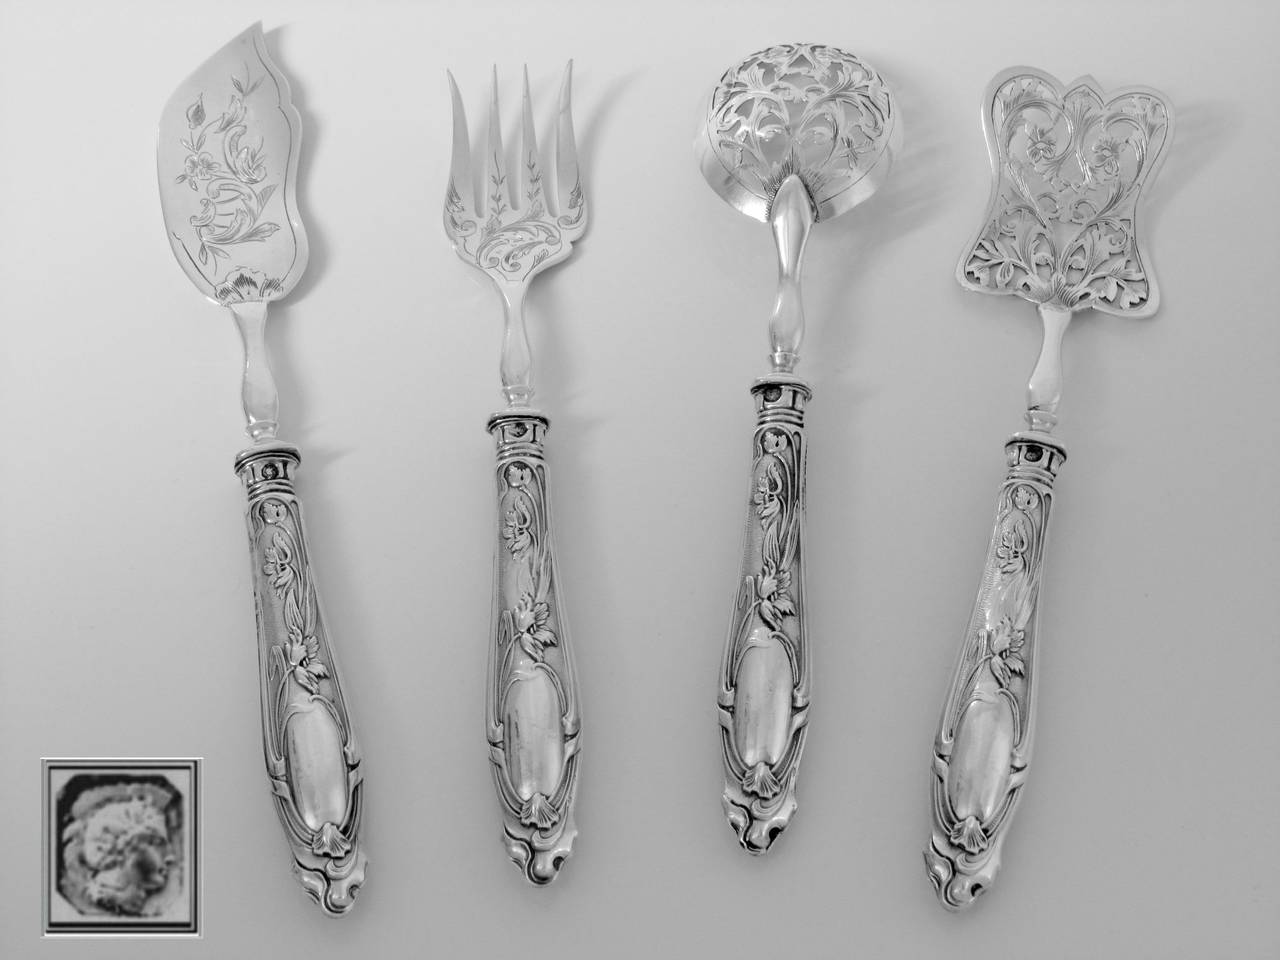 Gorgeous French Sterling Silver Dessert/Hors d'Oeuvre Set 4 pc with original box Art Nouveau period

Head of Minerve 1 st titre on the handles for 950/1000 French Sterling Silver guarantee. Silverplate upper parts.

A set of truly exceptional